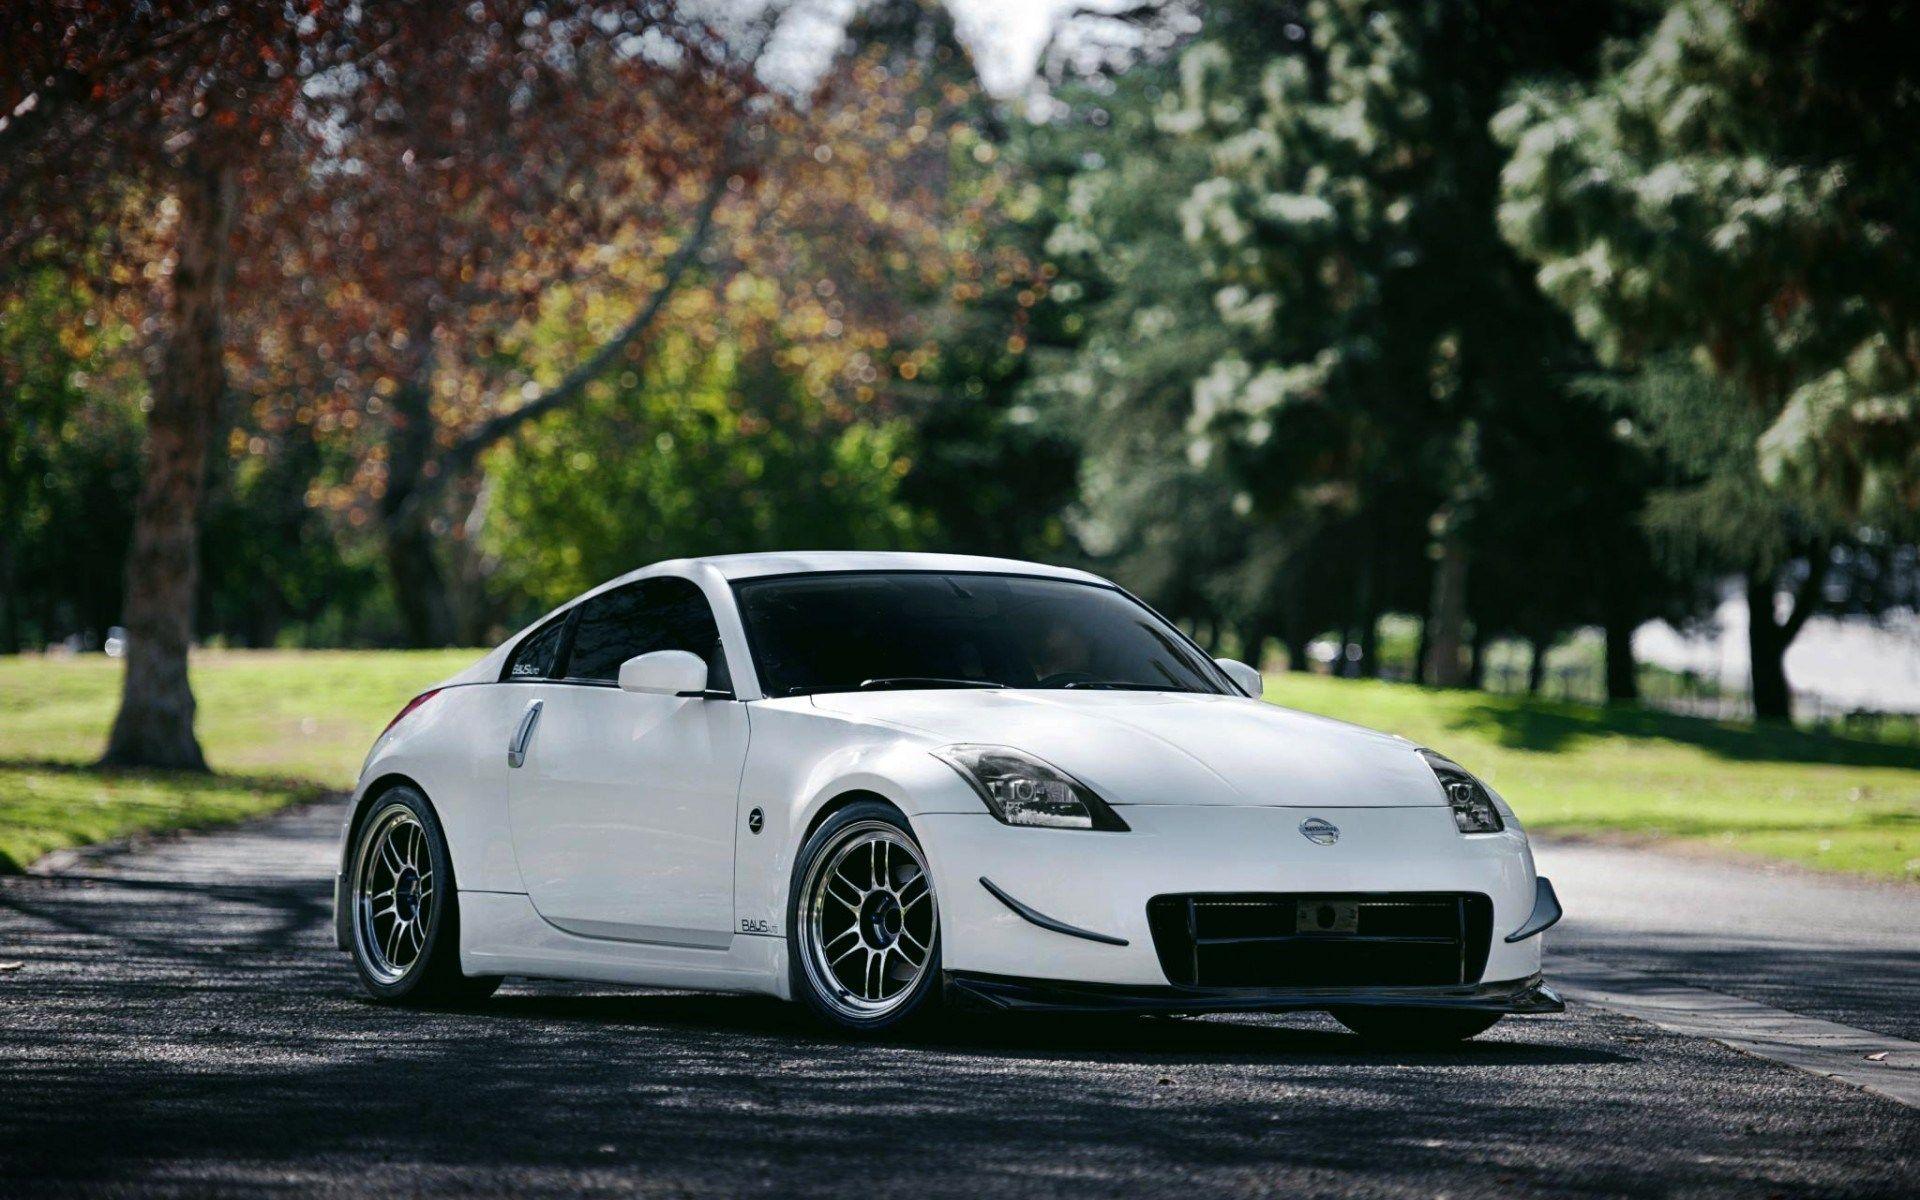 Nissan 350Z Full HD Wallpapers and Backgrounds Image